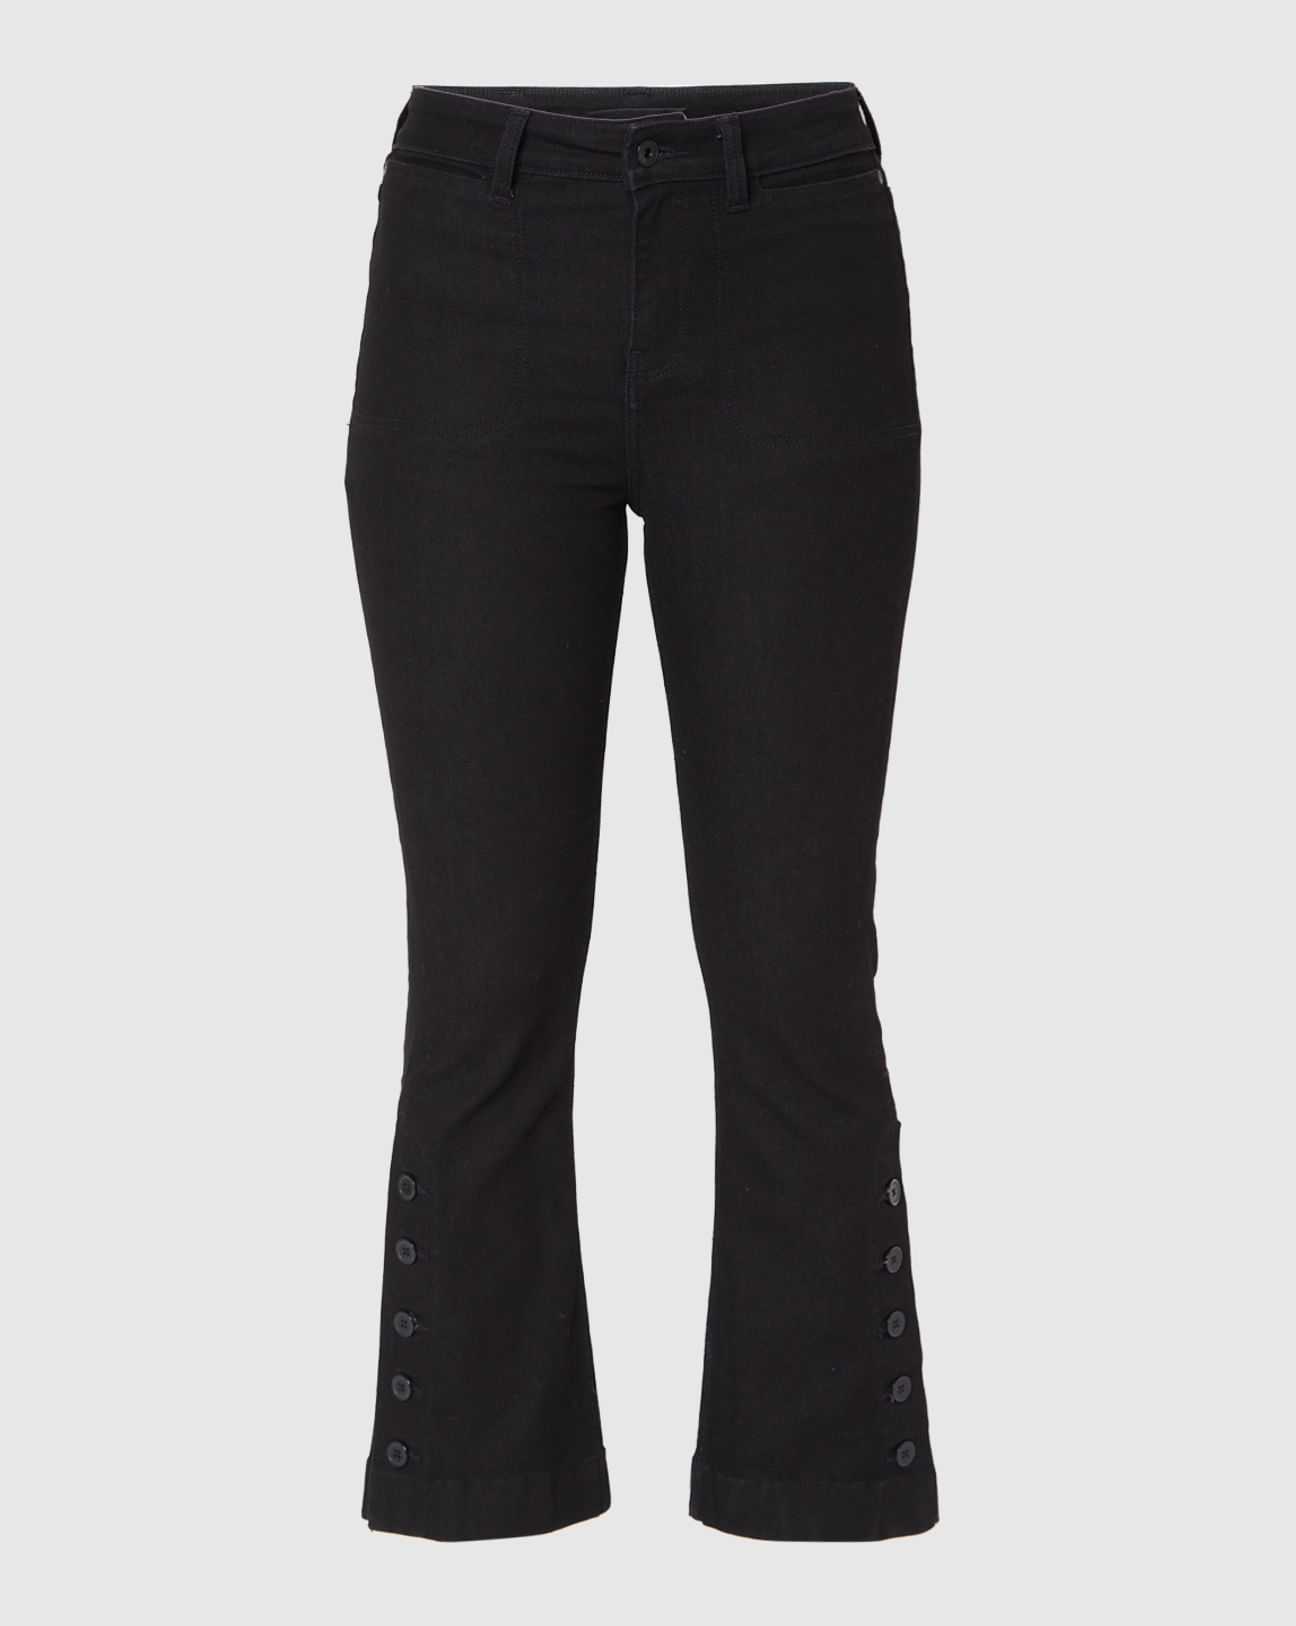 Buy Black Bootcut Jeans For Women Online in India